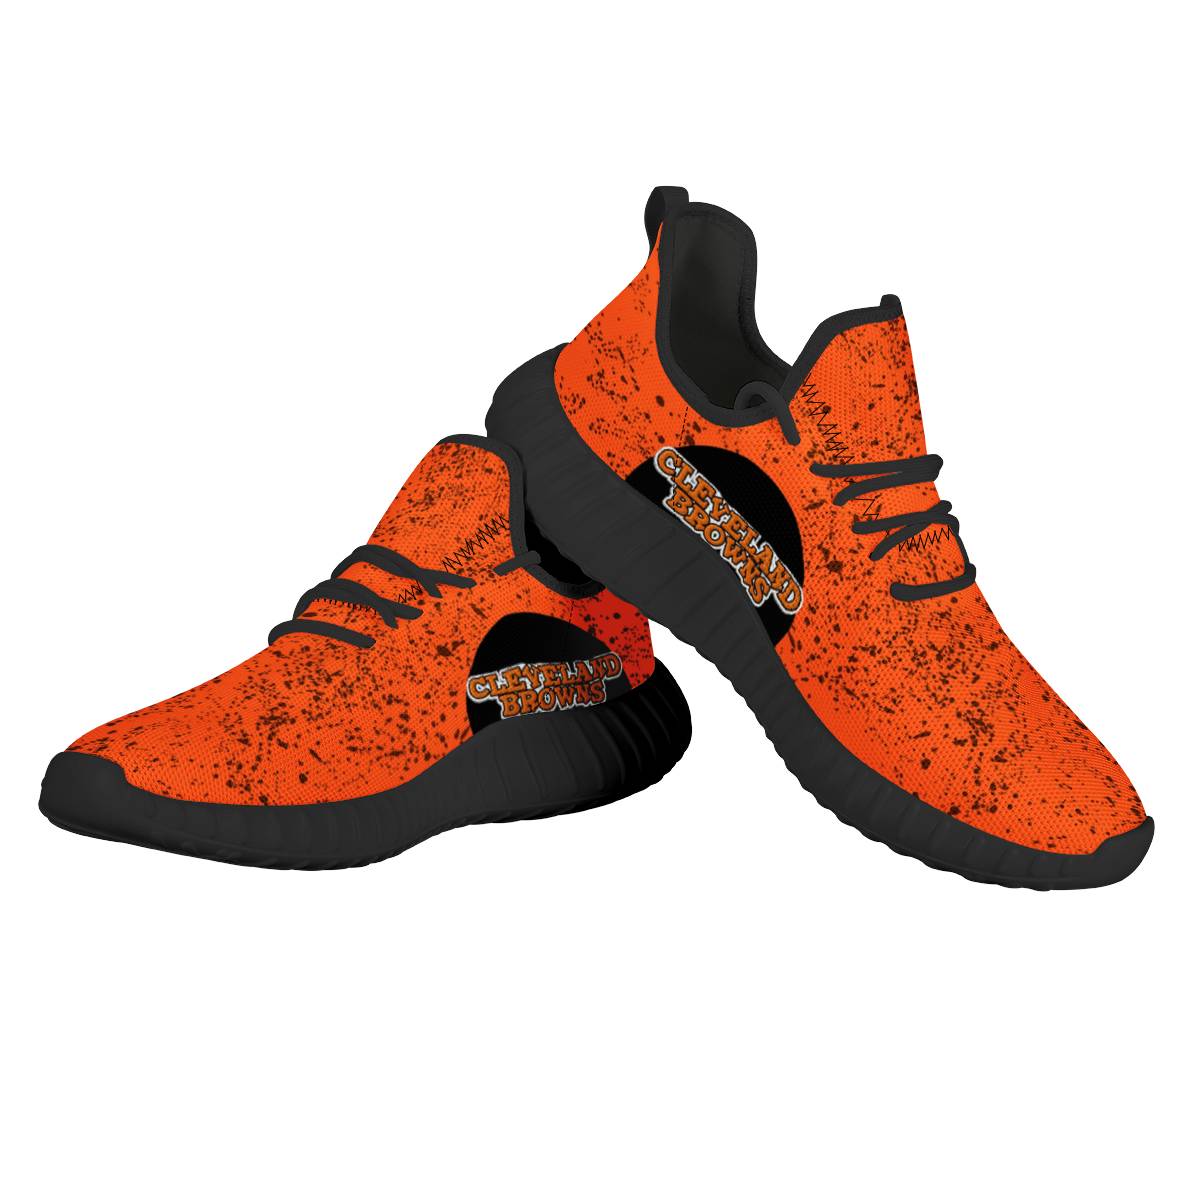 Women's Cleveland Browns Mesh Knit Sneakers/Shoes 009